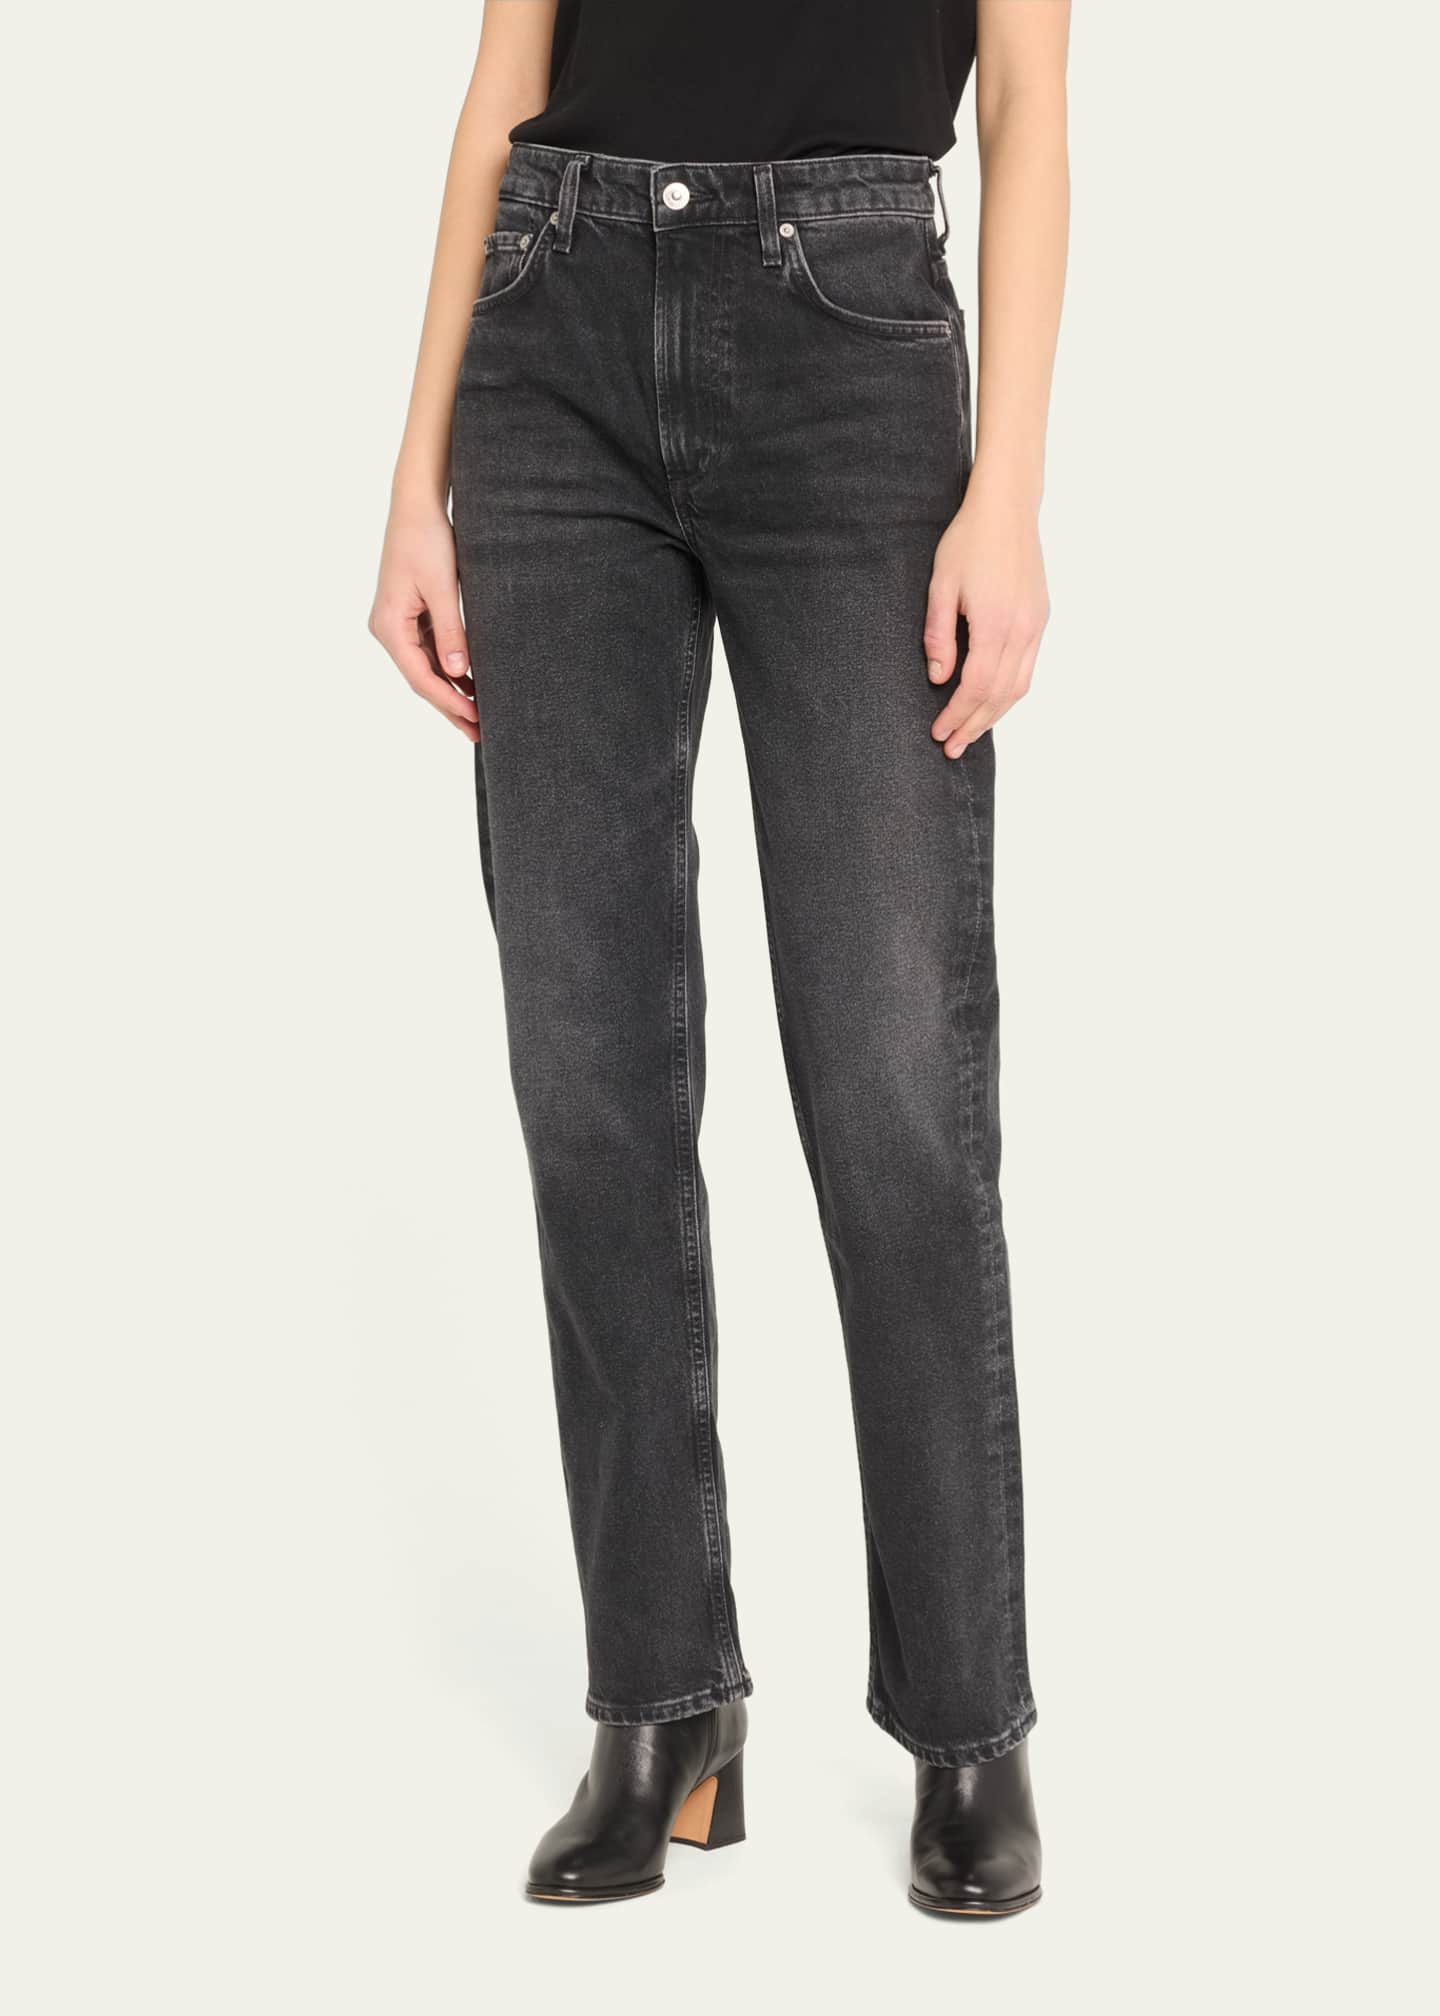 Citizens of Humanity Zurie High Rise Straight Jeans - Bergdorf Goodman